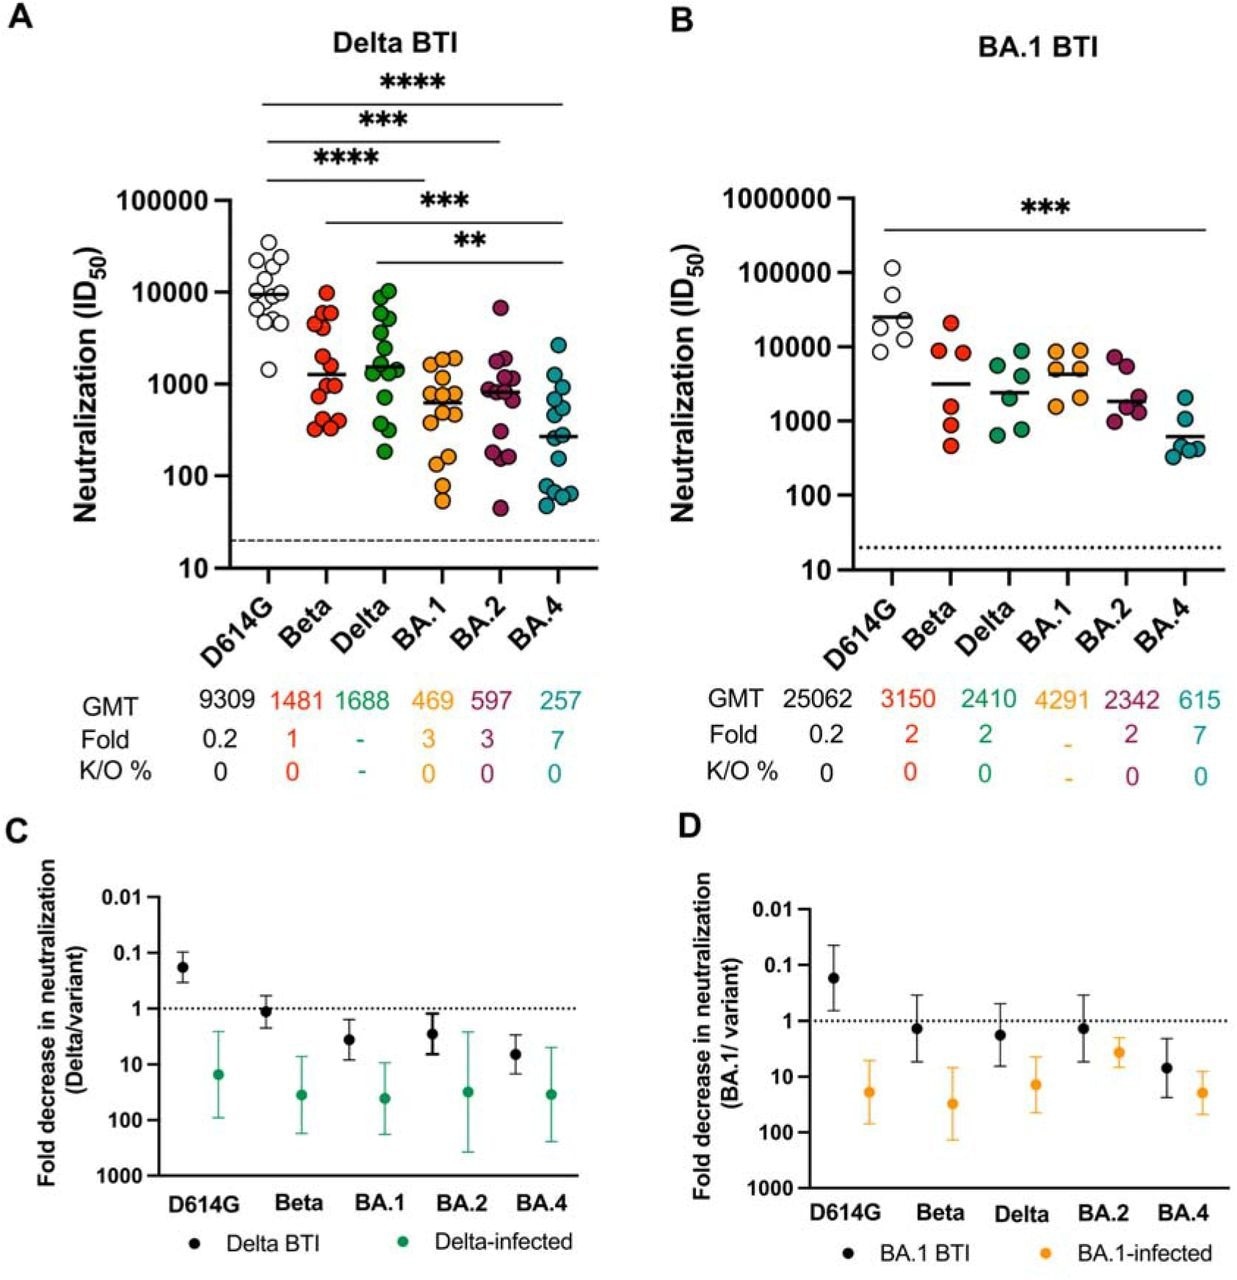 Breakthrough infections show reduced neutralization activity against BA.4, despite high titers against other VOCs. Neutralization titer (ID50) in convalescent plasma from vaccinated donors subsequently infected with (A) Delta and (B) Omicron BA.1. Plasma were tested against D614G, Beta, Delta, Omicron BA.1, BA.2 and BA.4. Lines indicate geometric mean titer (GMT) also represented below the plot with fold decrease and knock-out (K/O) of activity for other variants as a percentage relative to the infecting variant. Dotted lines indicate the limit of detection of the assay. Fold decrease in neutralization for each VOC represented as a ratio of the titer to the infecting variant Delta (C) or BA.1 (D), for infections in unvaccinated individuals (green for Delta and orange for BA.1) and BTIs (black). Statistical significance across variants is shown by Friedman test with Dunn’s correction. *p<0.05; **p<0.01; ***p<0.001; ****p<0.0001 and ns = non-significant. All data are representative of two independent experiments.